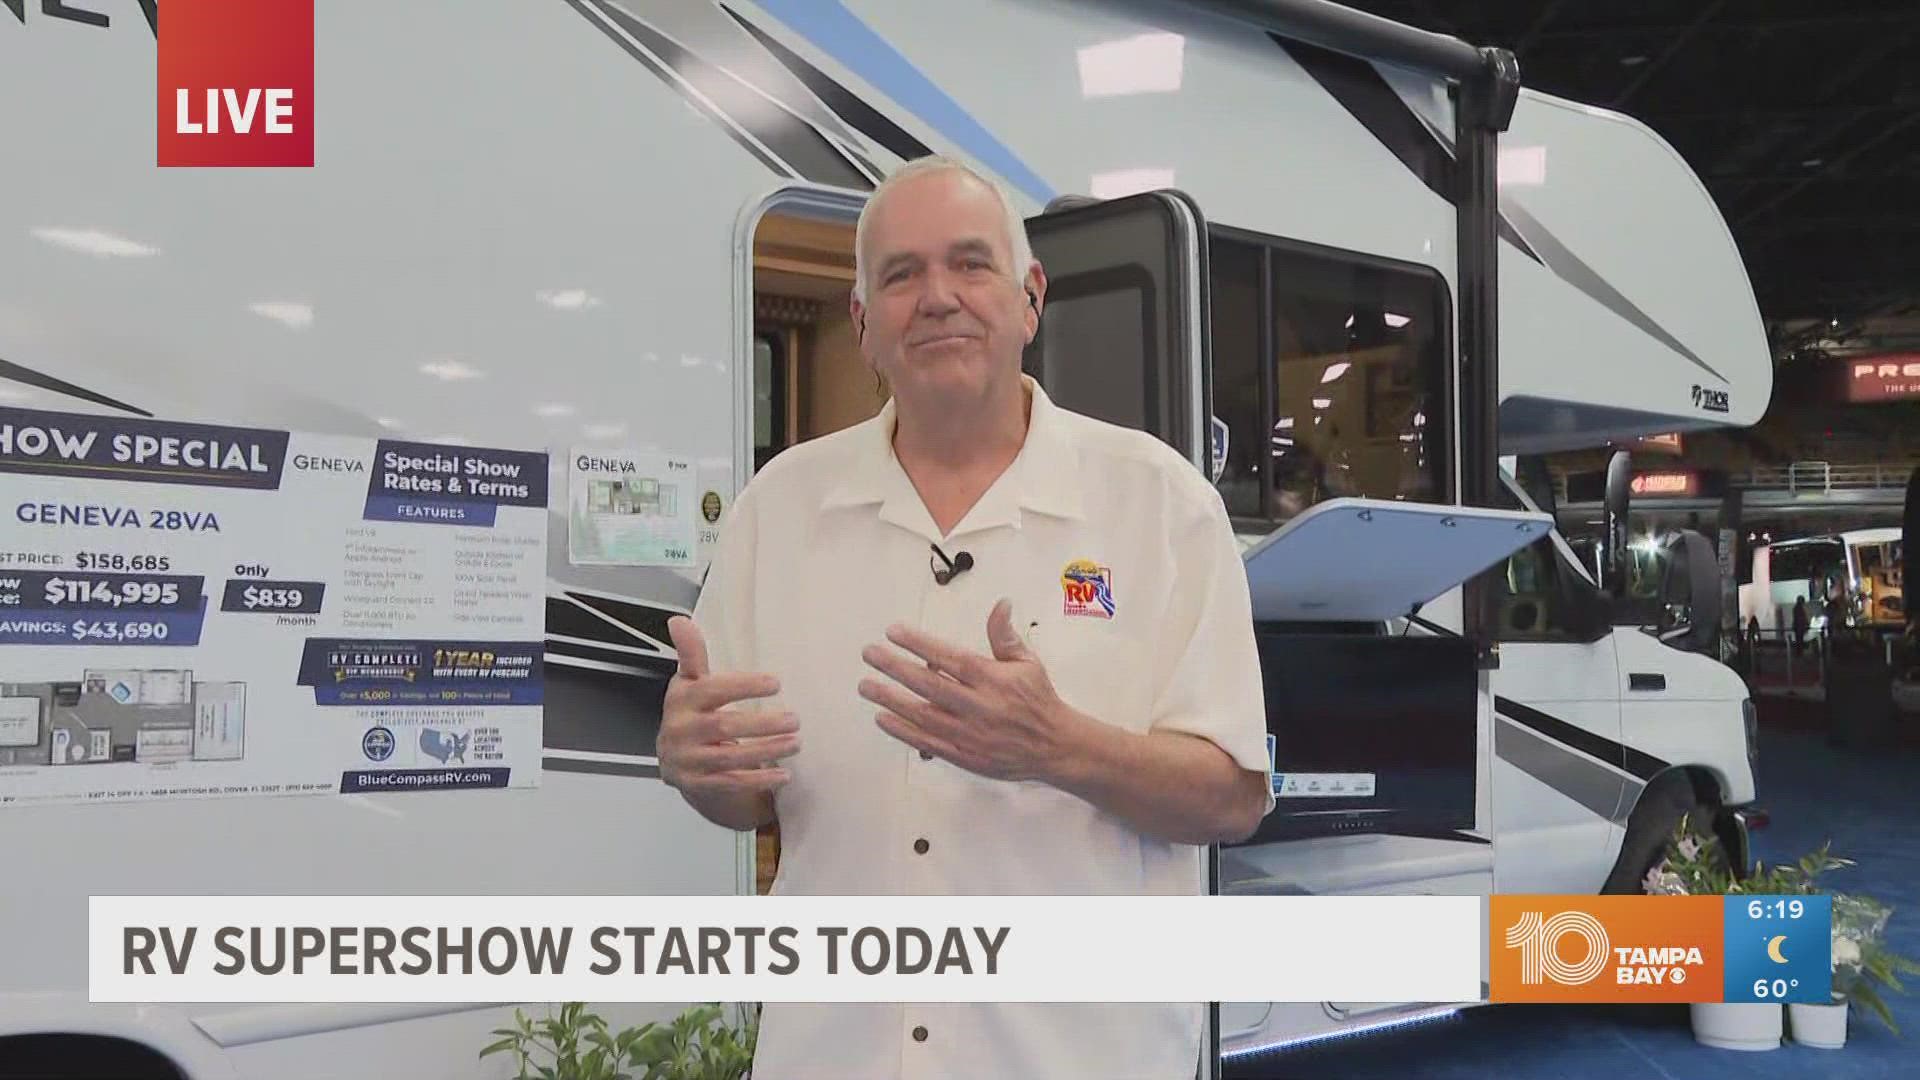 RVs at this year's show feature new accommodations that fit every price point.